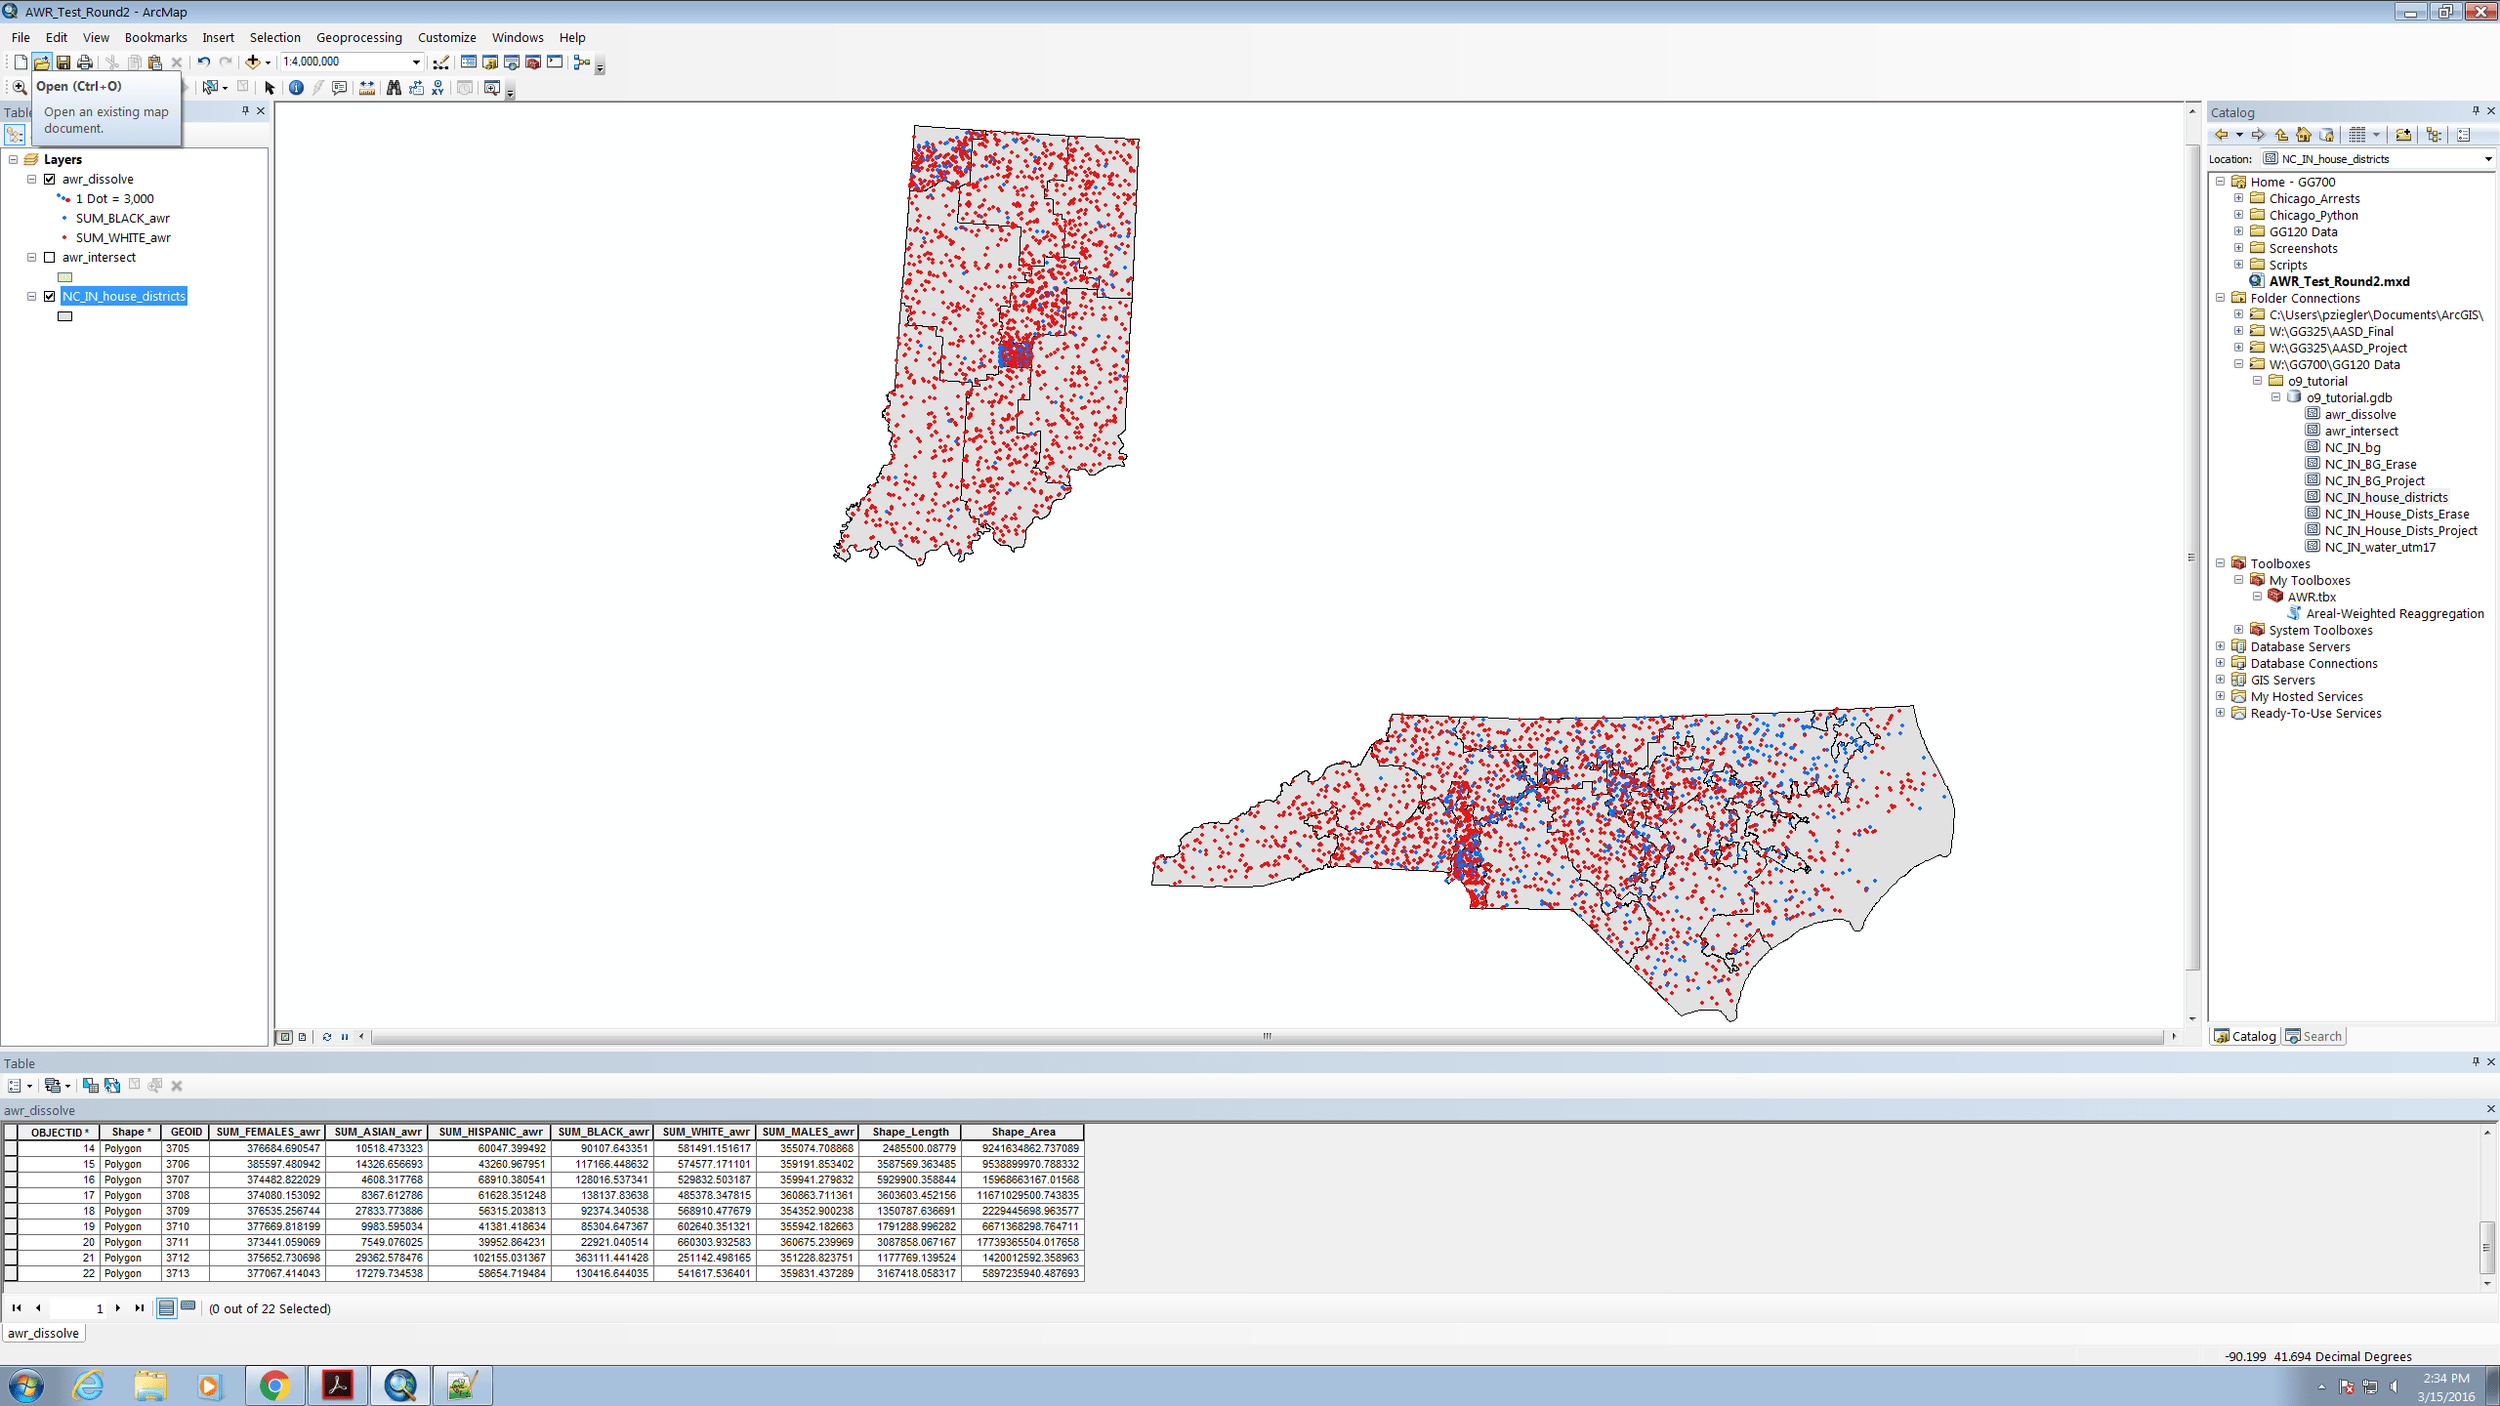 The result of running our AWR script to reaggregate racial data by Census block group to House districts.